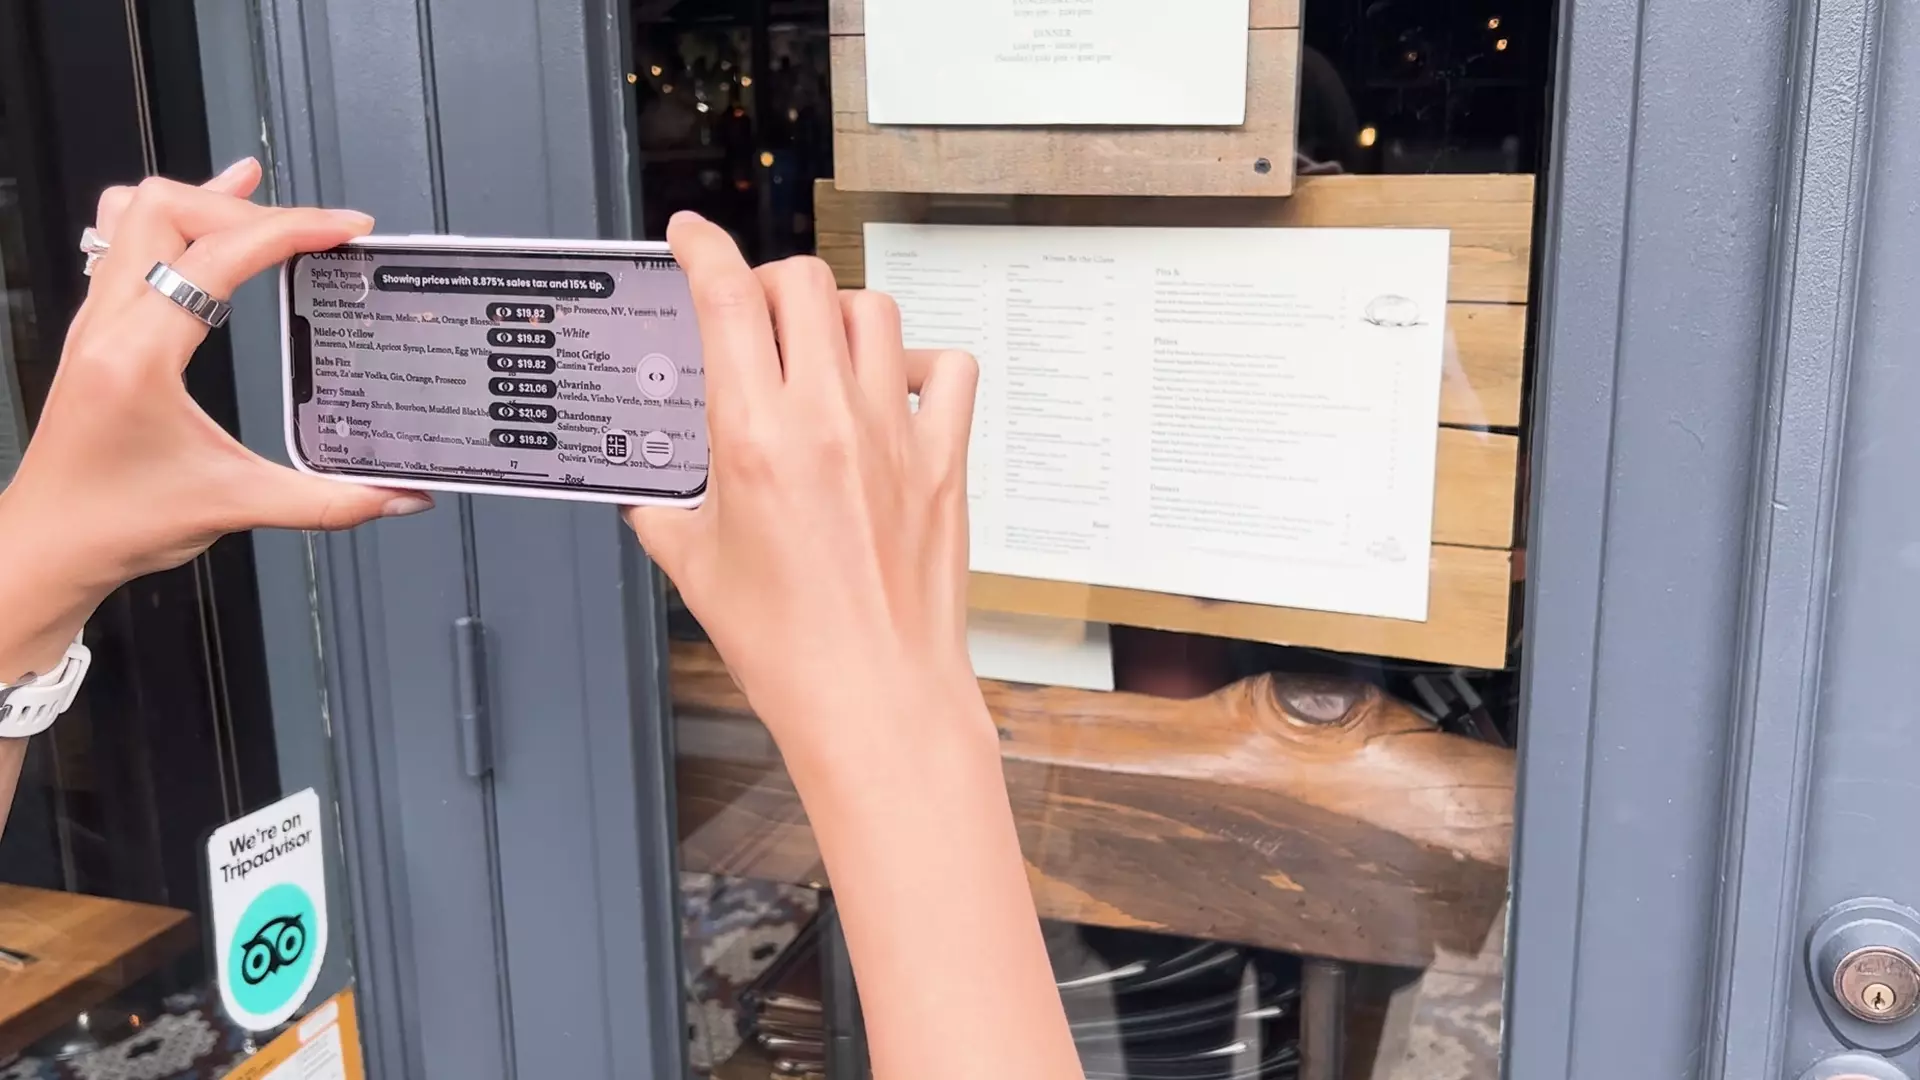 <p>A woman holding an iPhone that is using the Price After app. The Price After camera is pointed at a restaurant menu and on the phone prices can be shown next to the menu prices that show the prices of the food and drink after tip and tax.</p>